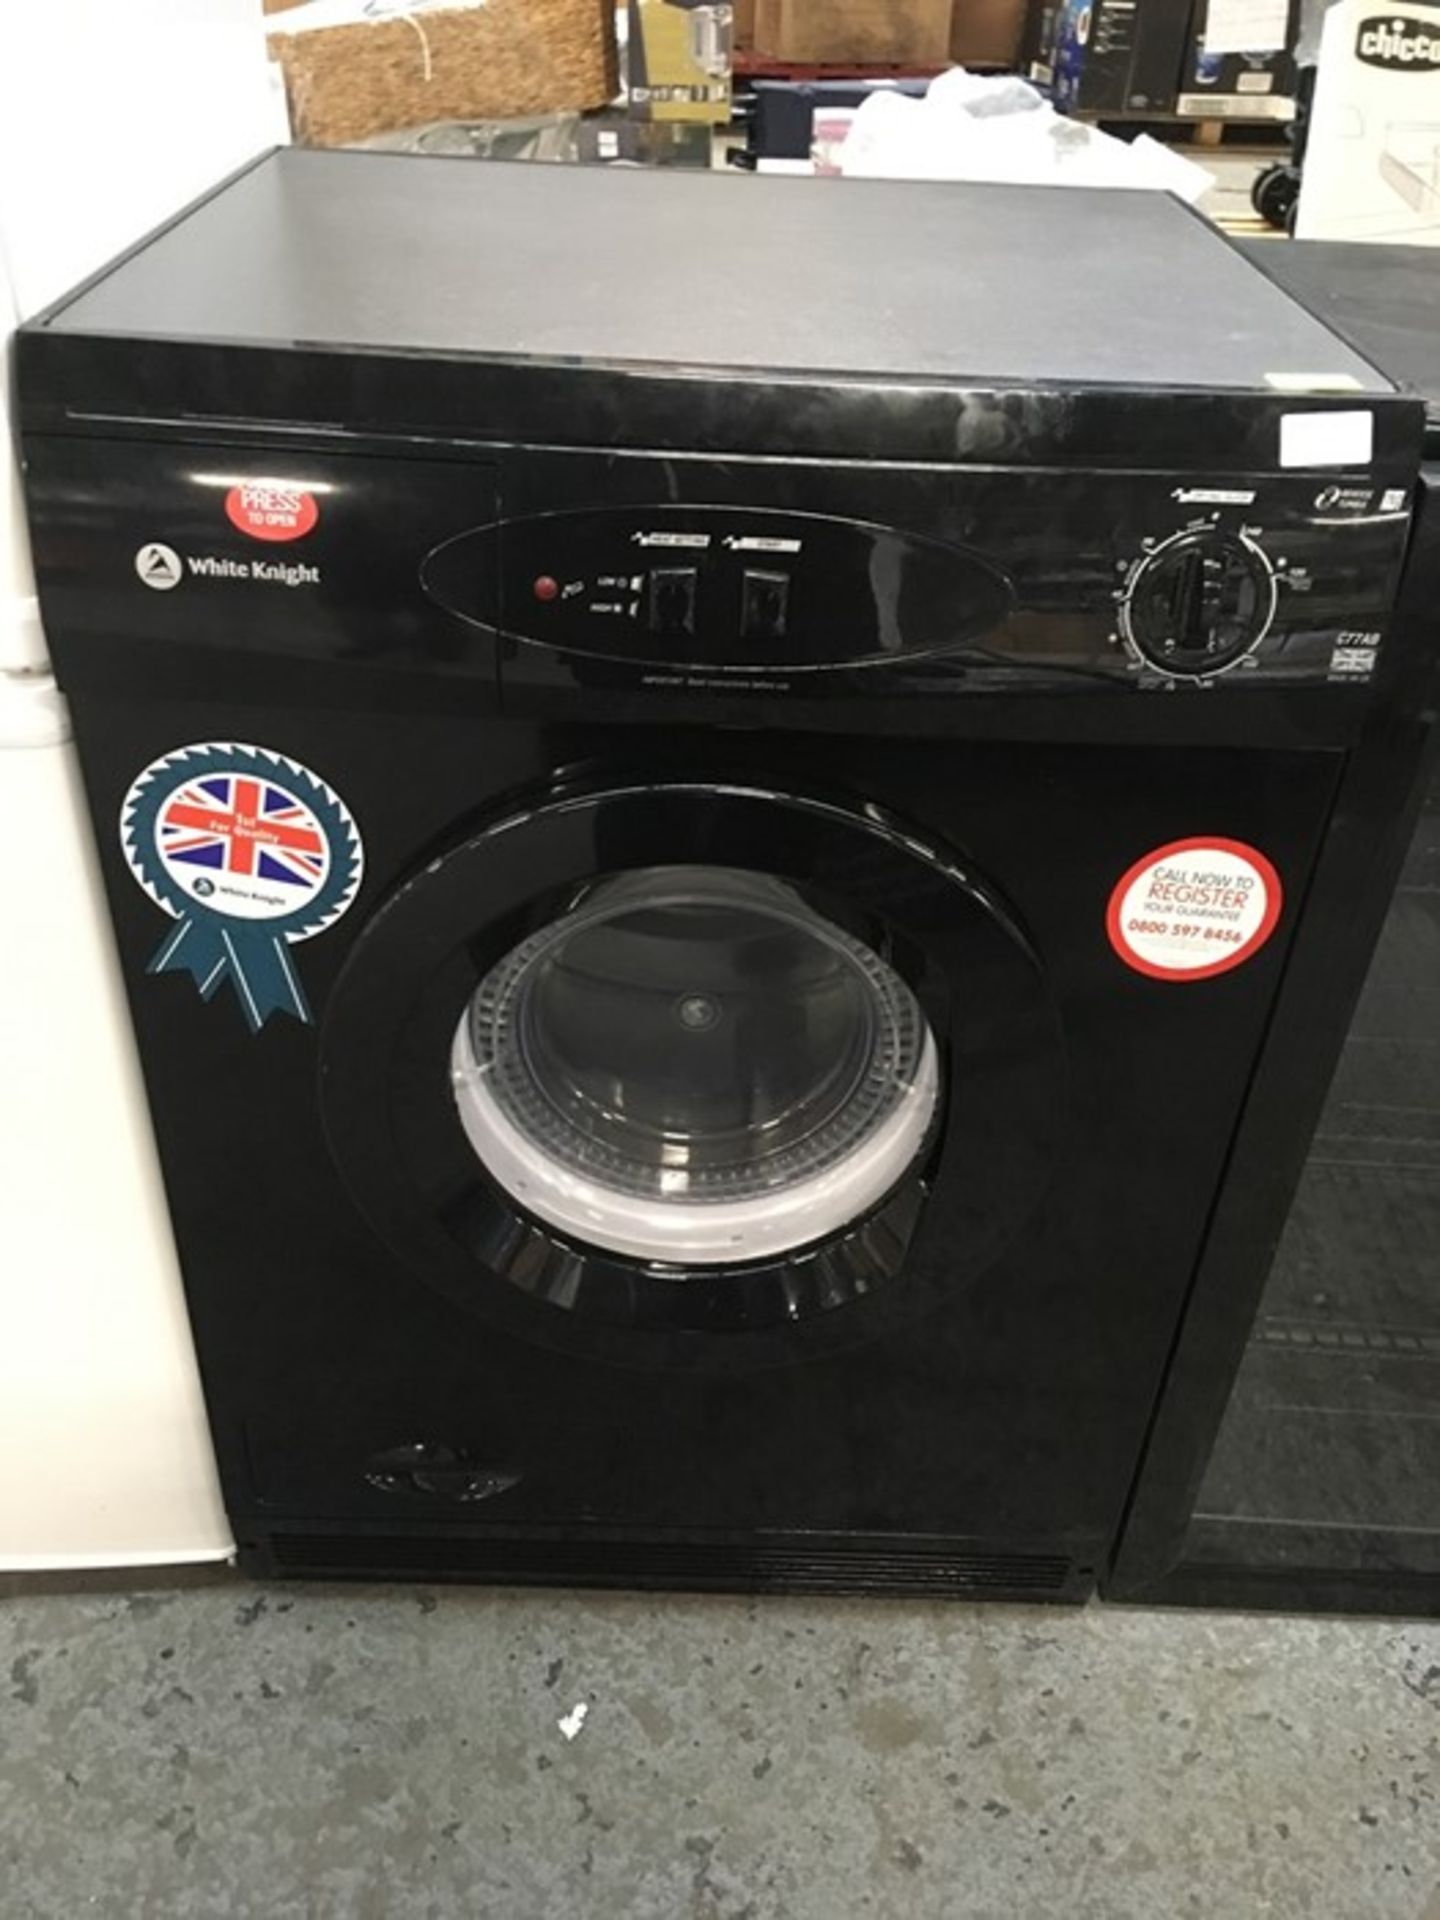 1 WHITE KNIGHT C77AB TUMBLE DRYER / COLOUR: BLACK / RRP £235.00 (PUBLIC VIEWING AVAILABLE)